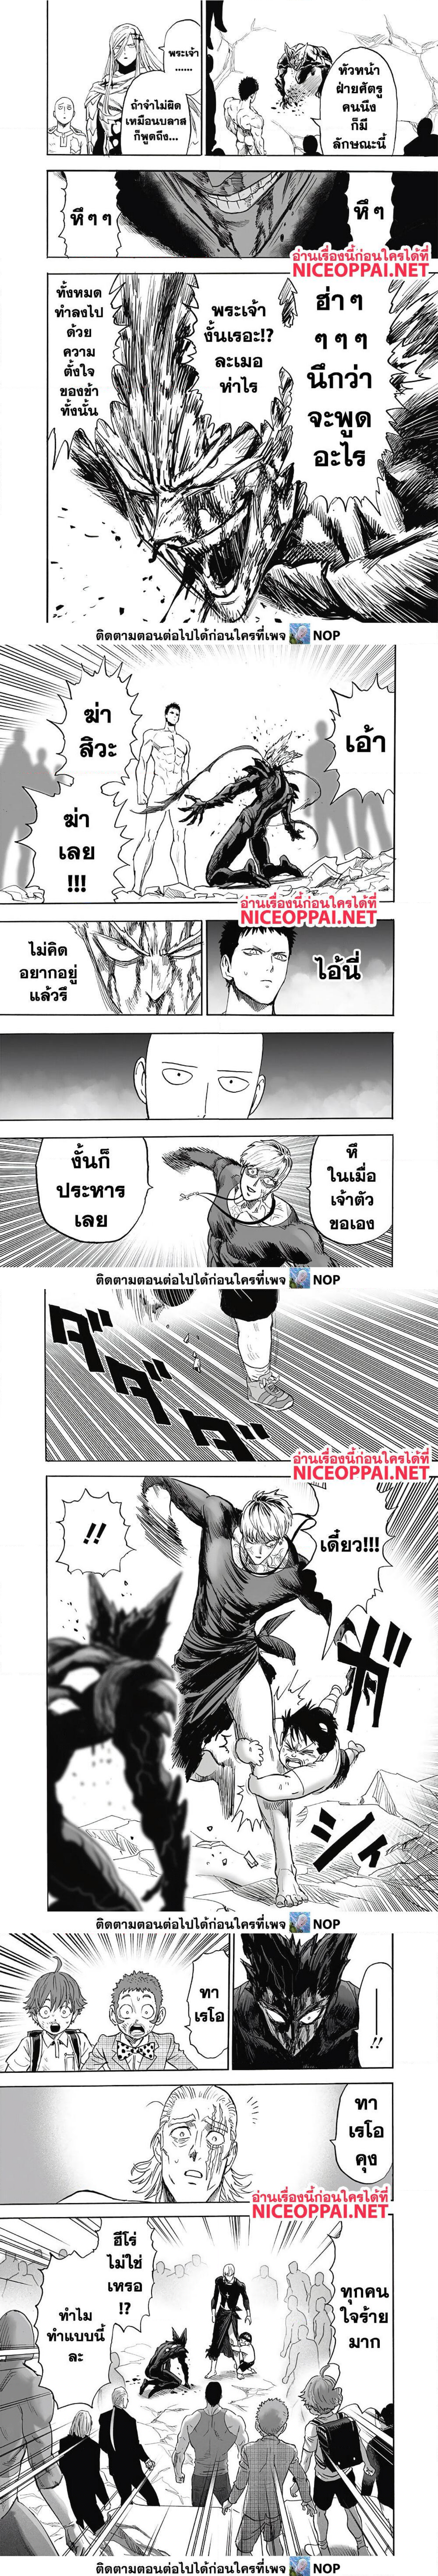 One Punch Man07